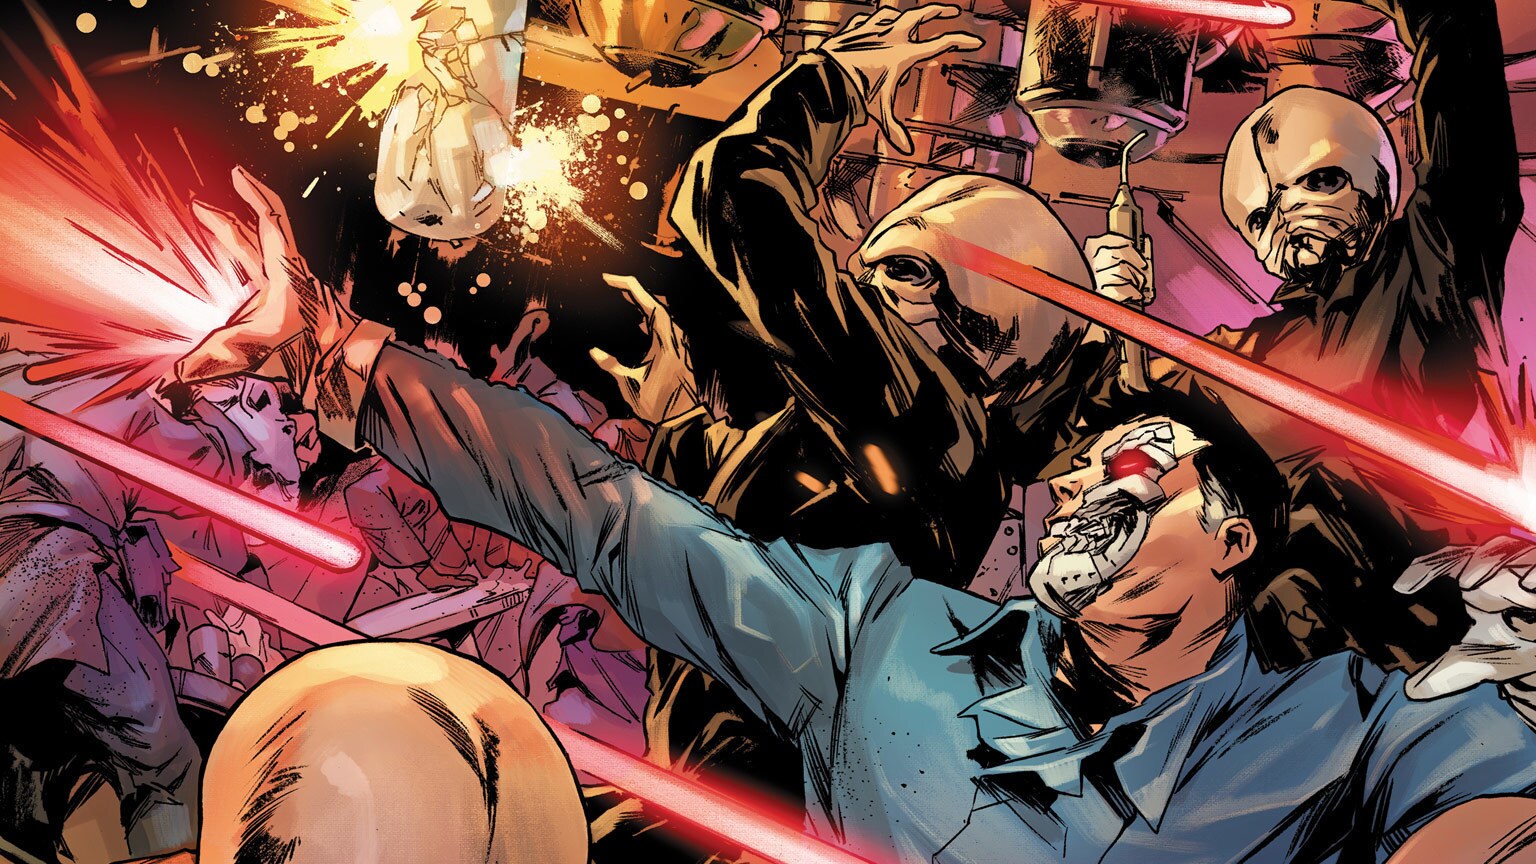 Valance and Han Solo Fly TIEs in Marvel’s Bounty Hunters #8 - Exclusive Preview